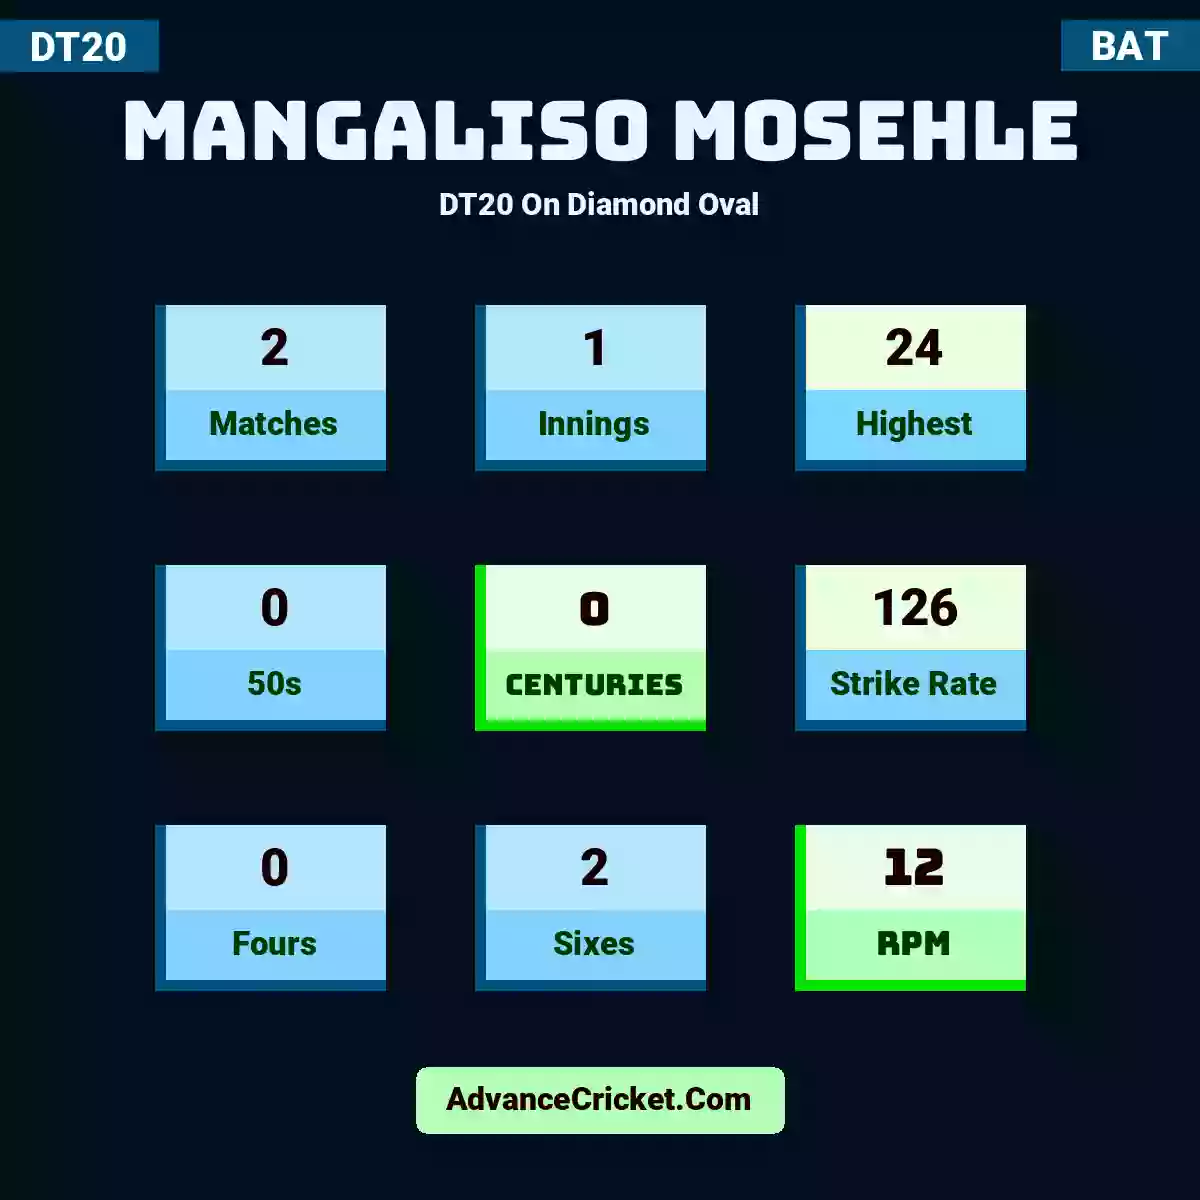 Mangaliso Mosehle DT20  On Diamond Oval, Mangaliso Mosehle played 2 matches, scored 24 runs as highest, 0 half-centuries, and 0 centuries, with a strike rate of 126. M.Mosehle hit 0 fours and 2 sixes, with an RPM of 12.